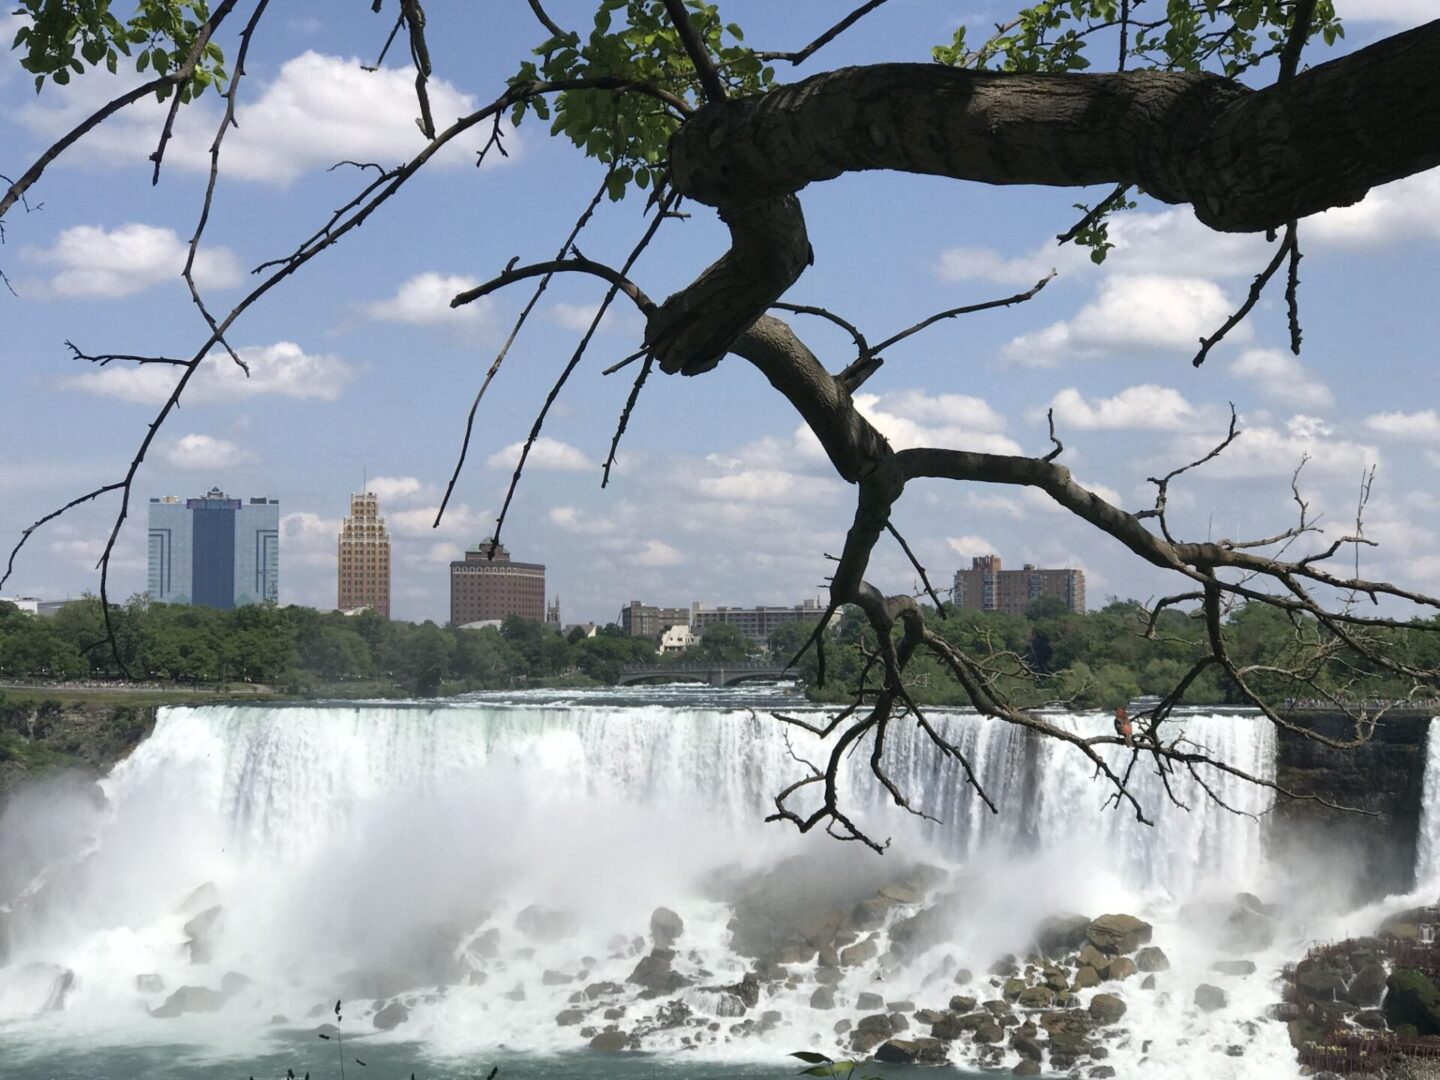 A tree branch in front of the falls